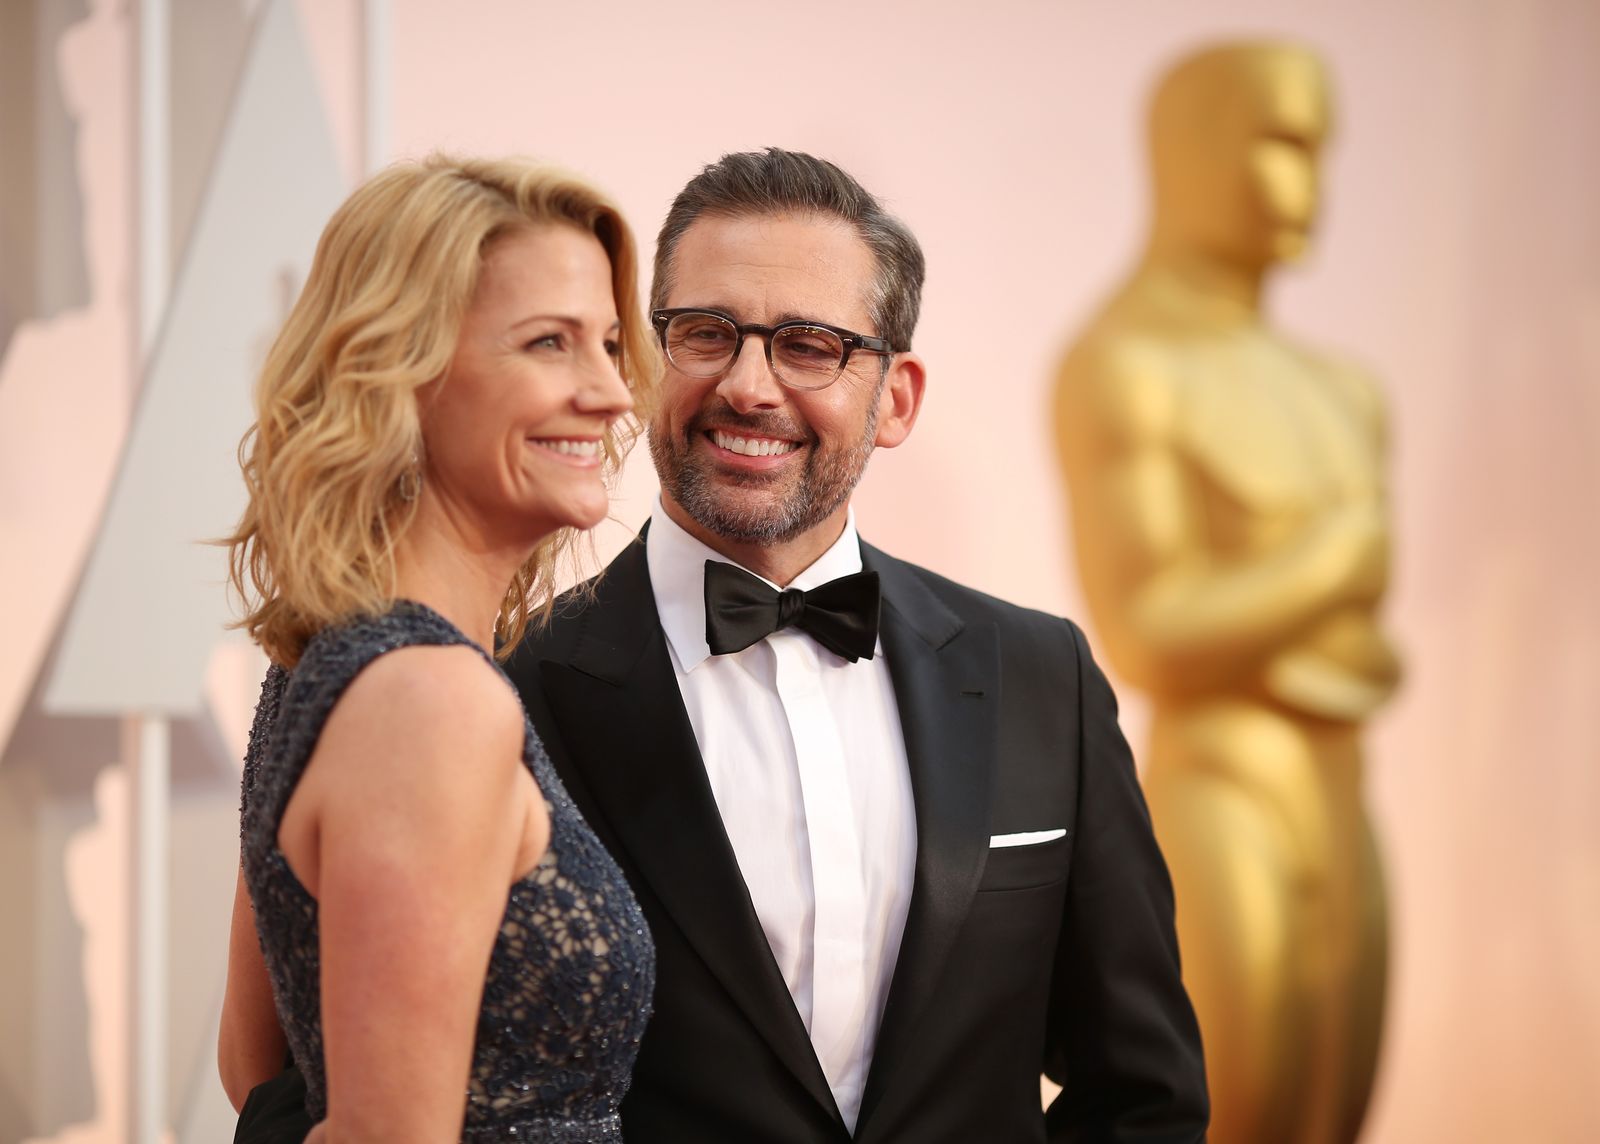 Steve and Nancy Carell at the 87th Annual Academy Awards at Hollywood & Highland Center on February 22, 2015 | Source: Getty Images